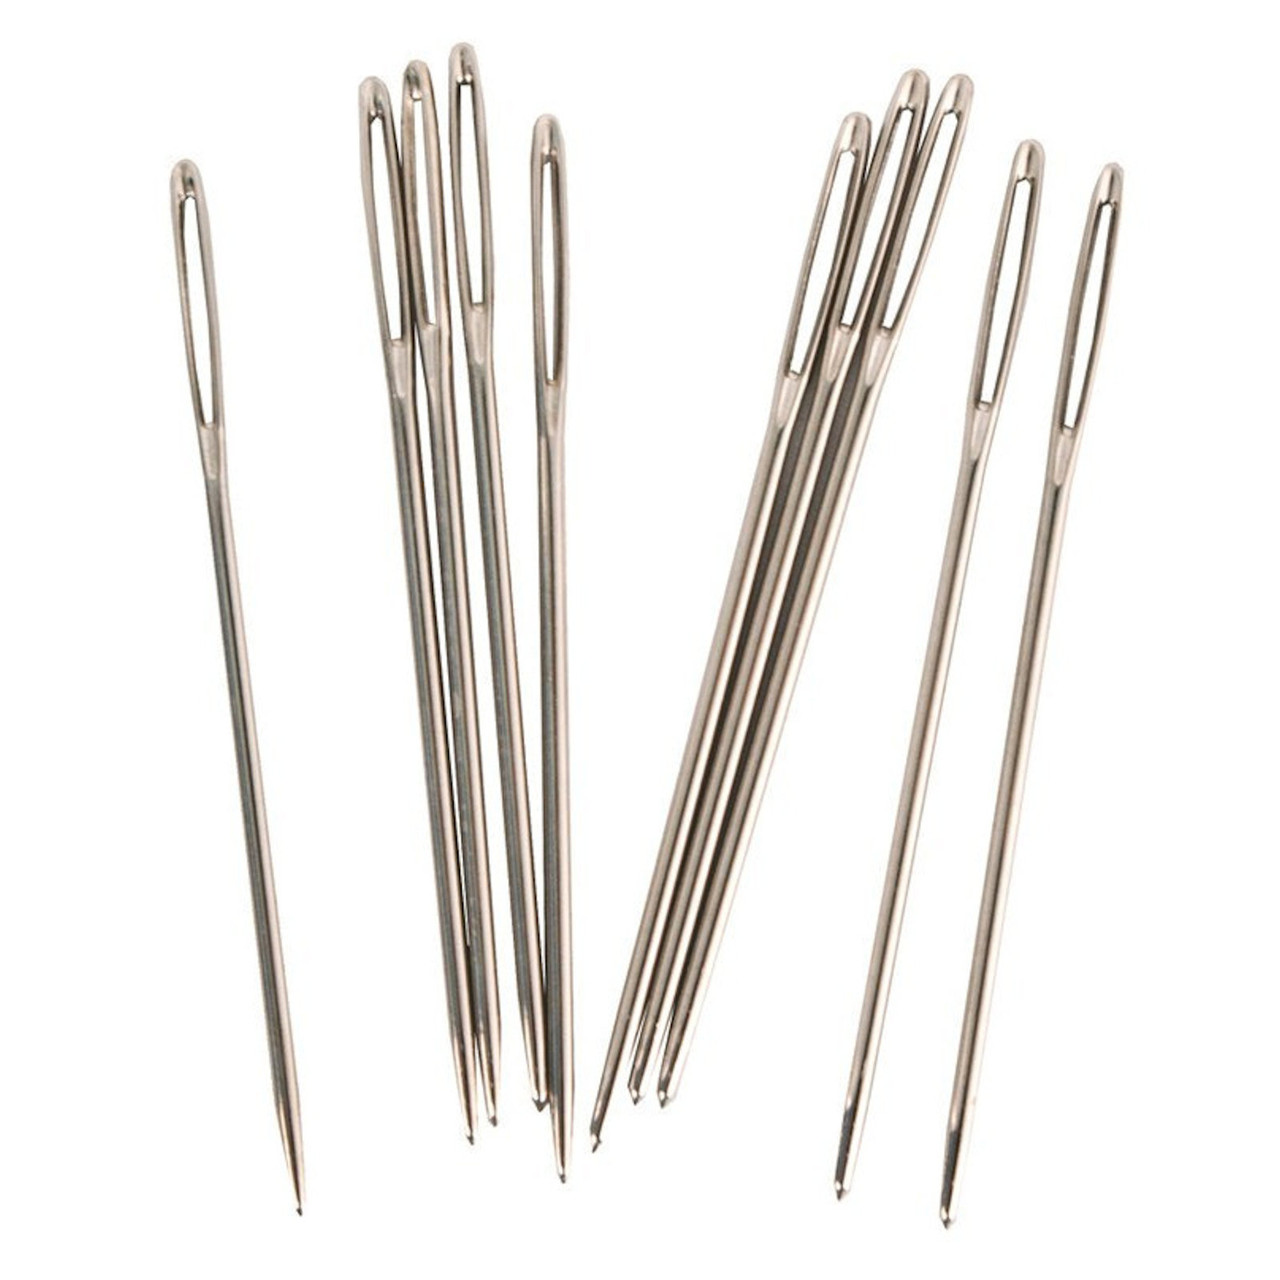 Large Eye Stitching Needles Blunt Tip 10 Pack BN018-10 Made in USA ...